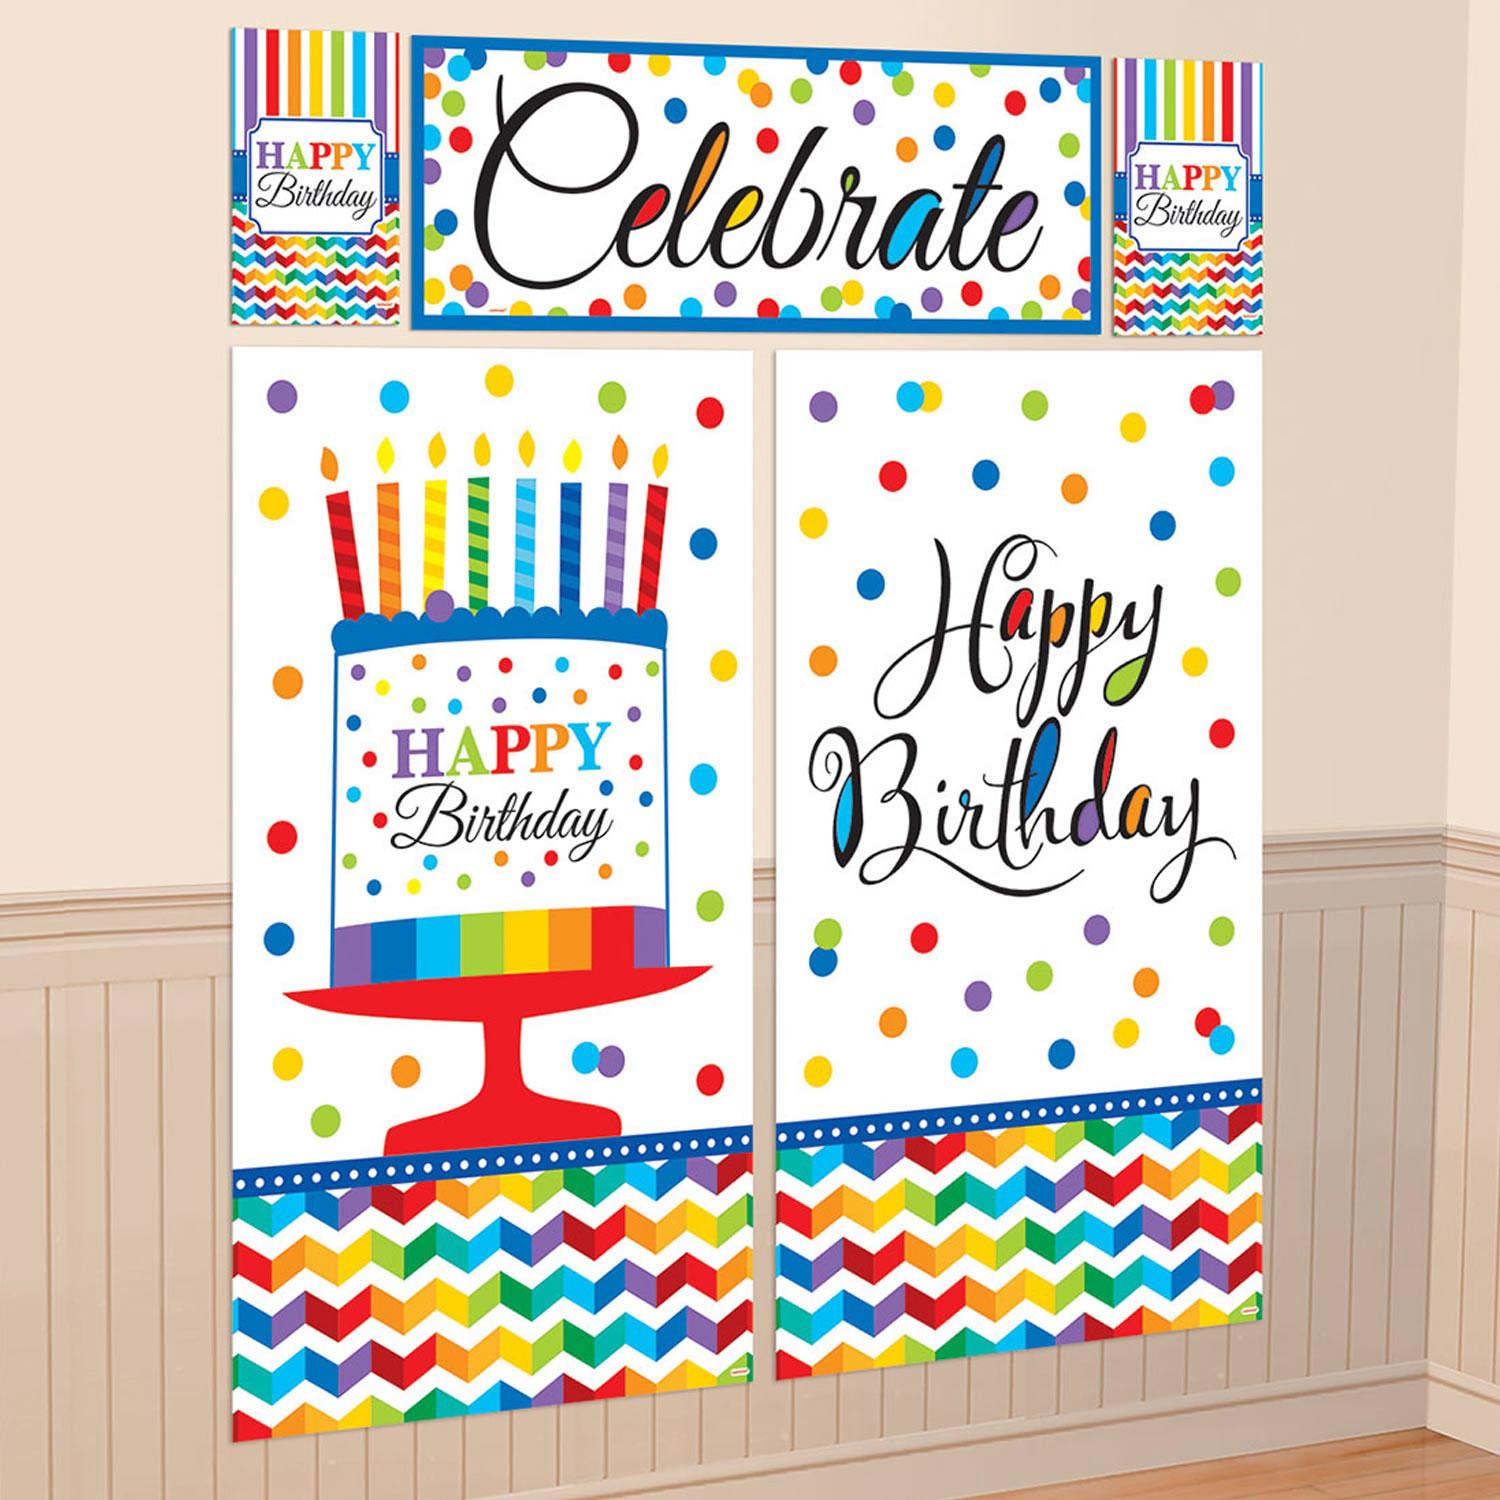 Bright Birthday Wall Scene Setter Decorating Kit by Amscan 670472 available here at Karnival Costumes online party shop